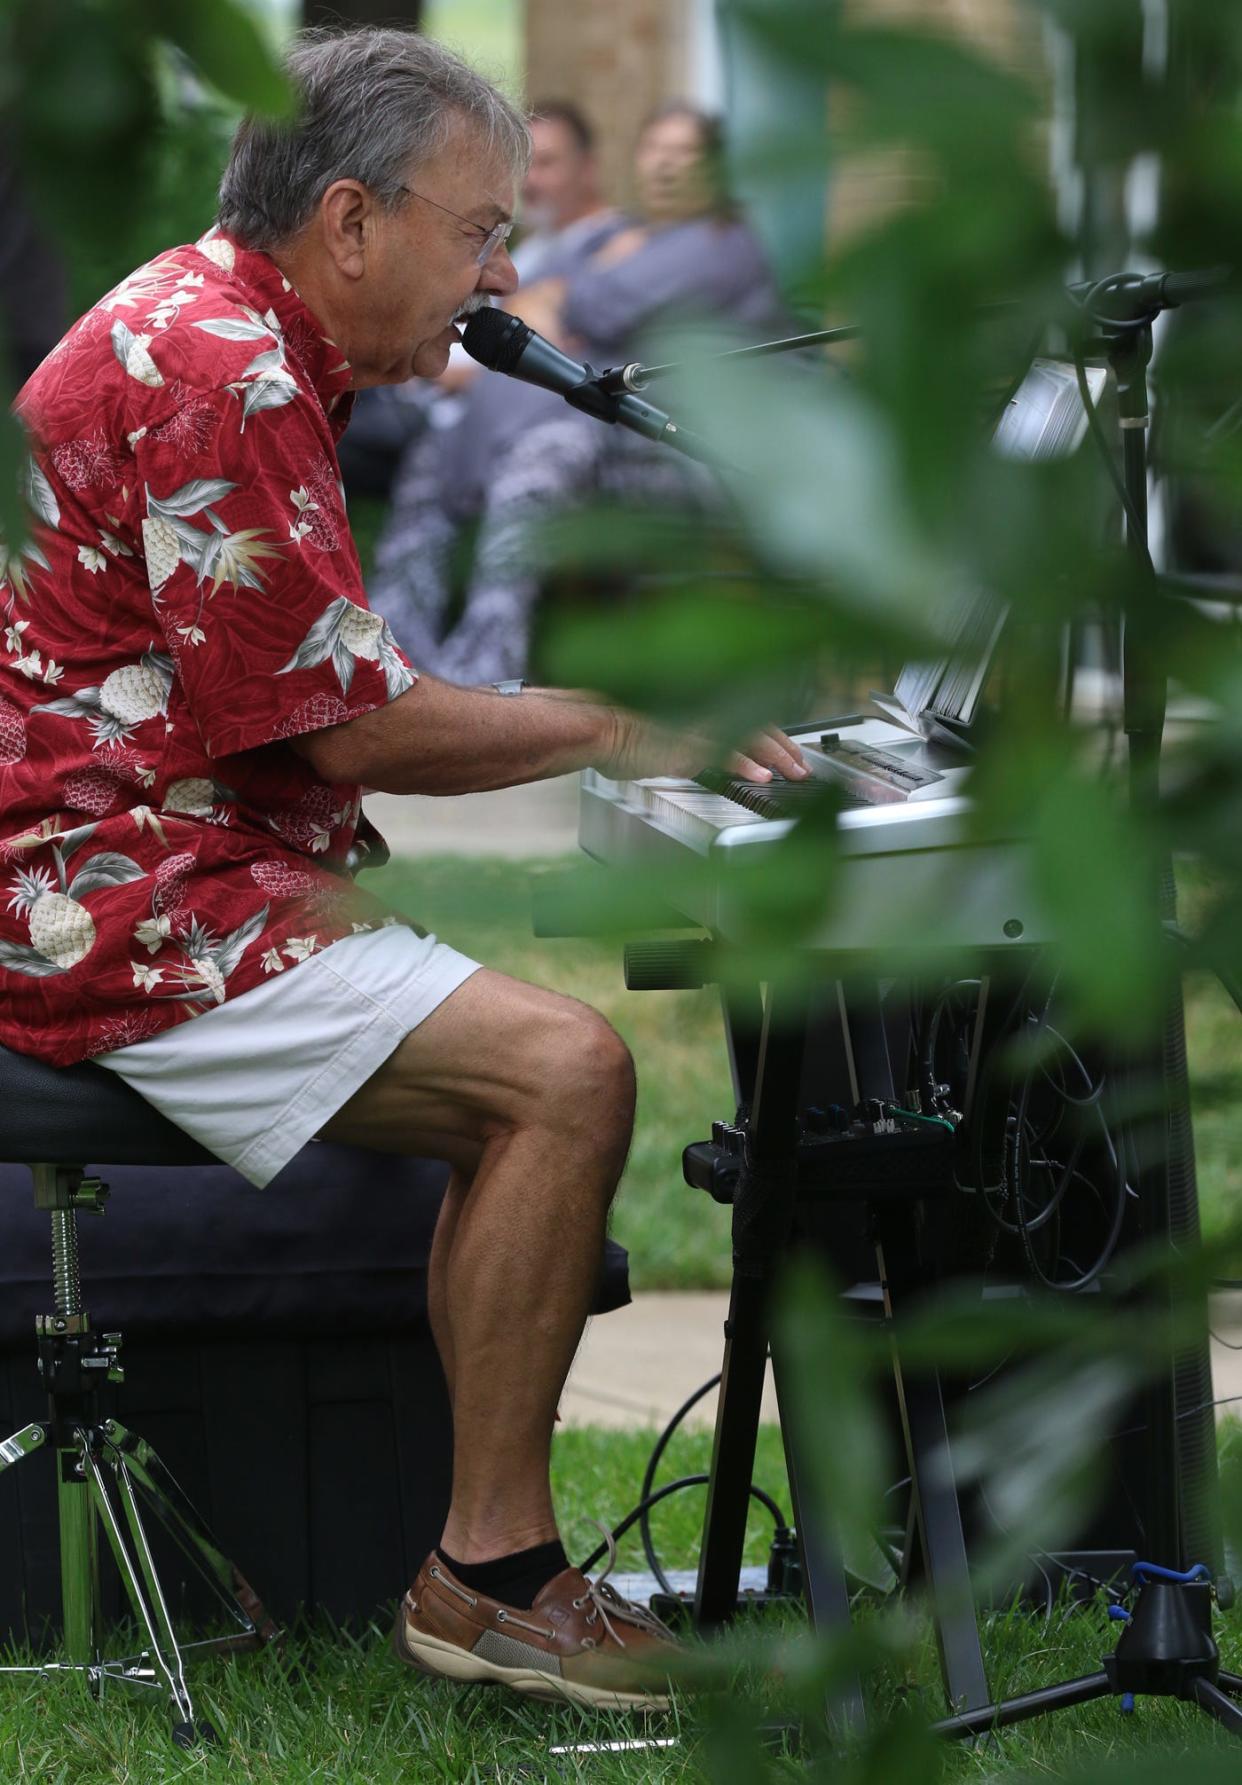 Dave Bonivtch performs outside on the lawn of the Earl Scruggs Center in downtown Shelby Saturday morning, June 26, 2021, during the 18th annual Art of Sound Festival.